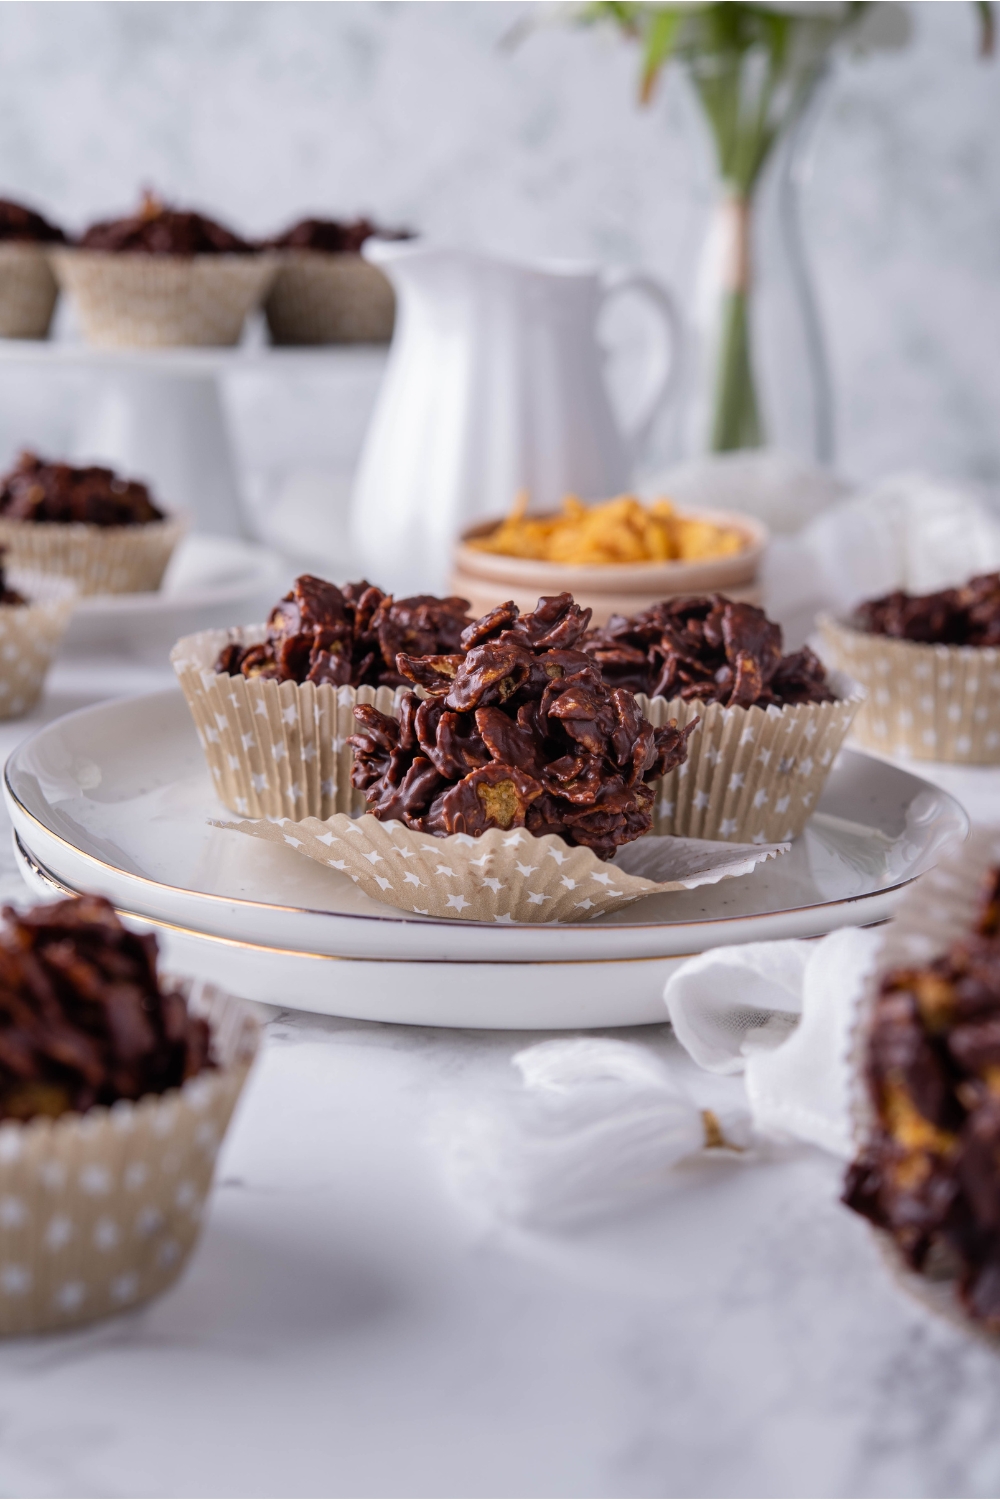 A plate with three chocolate cornflake clusters in muffin liners on a plate.